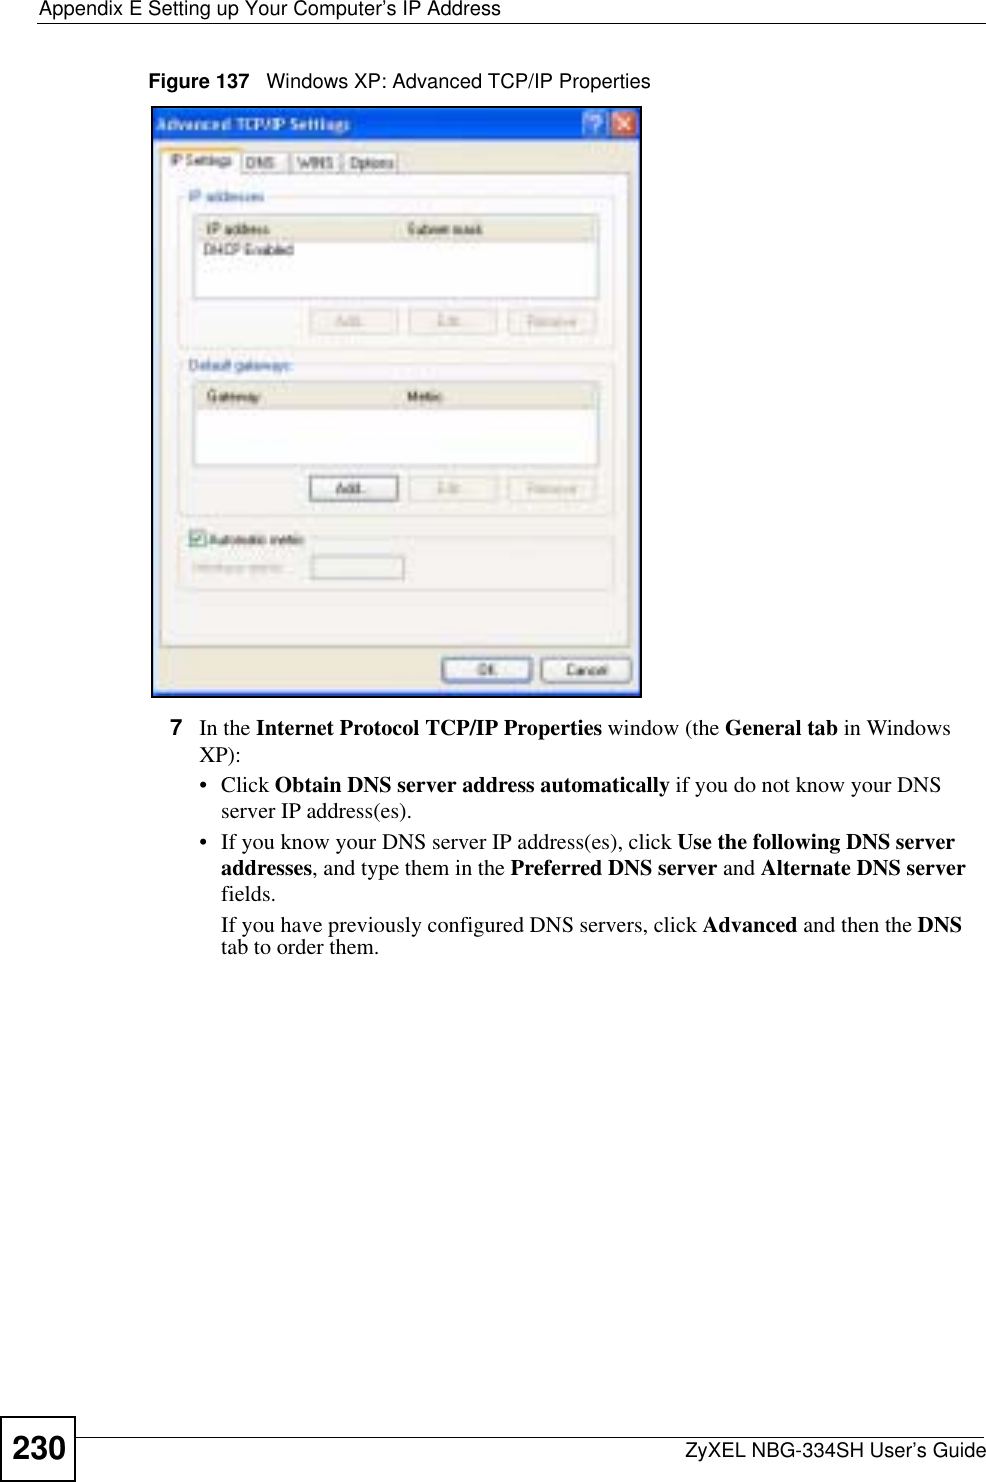 Appendix E Setting up Your Computer’s IP AddressZyXEL NBG-334SH User’s Guide230Figure 137   Windows XP: Advanced TCP/IP Properties7In the Internet Protocol TCP/IP Properties window (the General tab in Windows XP):• Click Obtain DNS server address automatically if you do not know your DNS server IP address(es).• If you know your DNS server IP address(es), click Use the following DNS server addresses, and type them in the Preferred DNS server and Alternate DNS serverfields.If you have previously configured DNS servers, click Advanced and then the DNStab to order them.